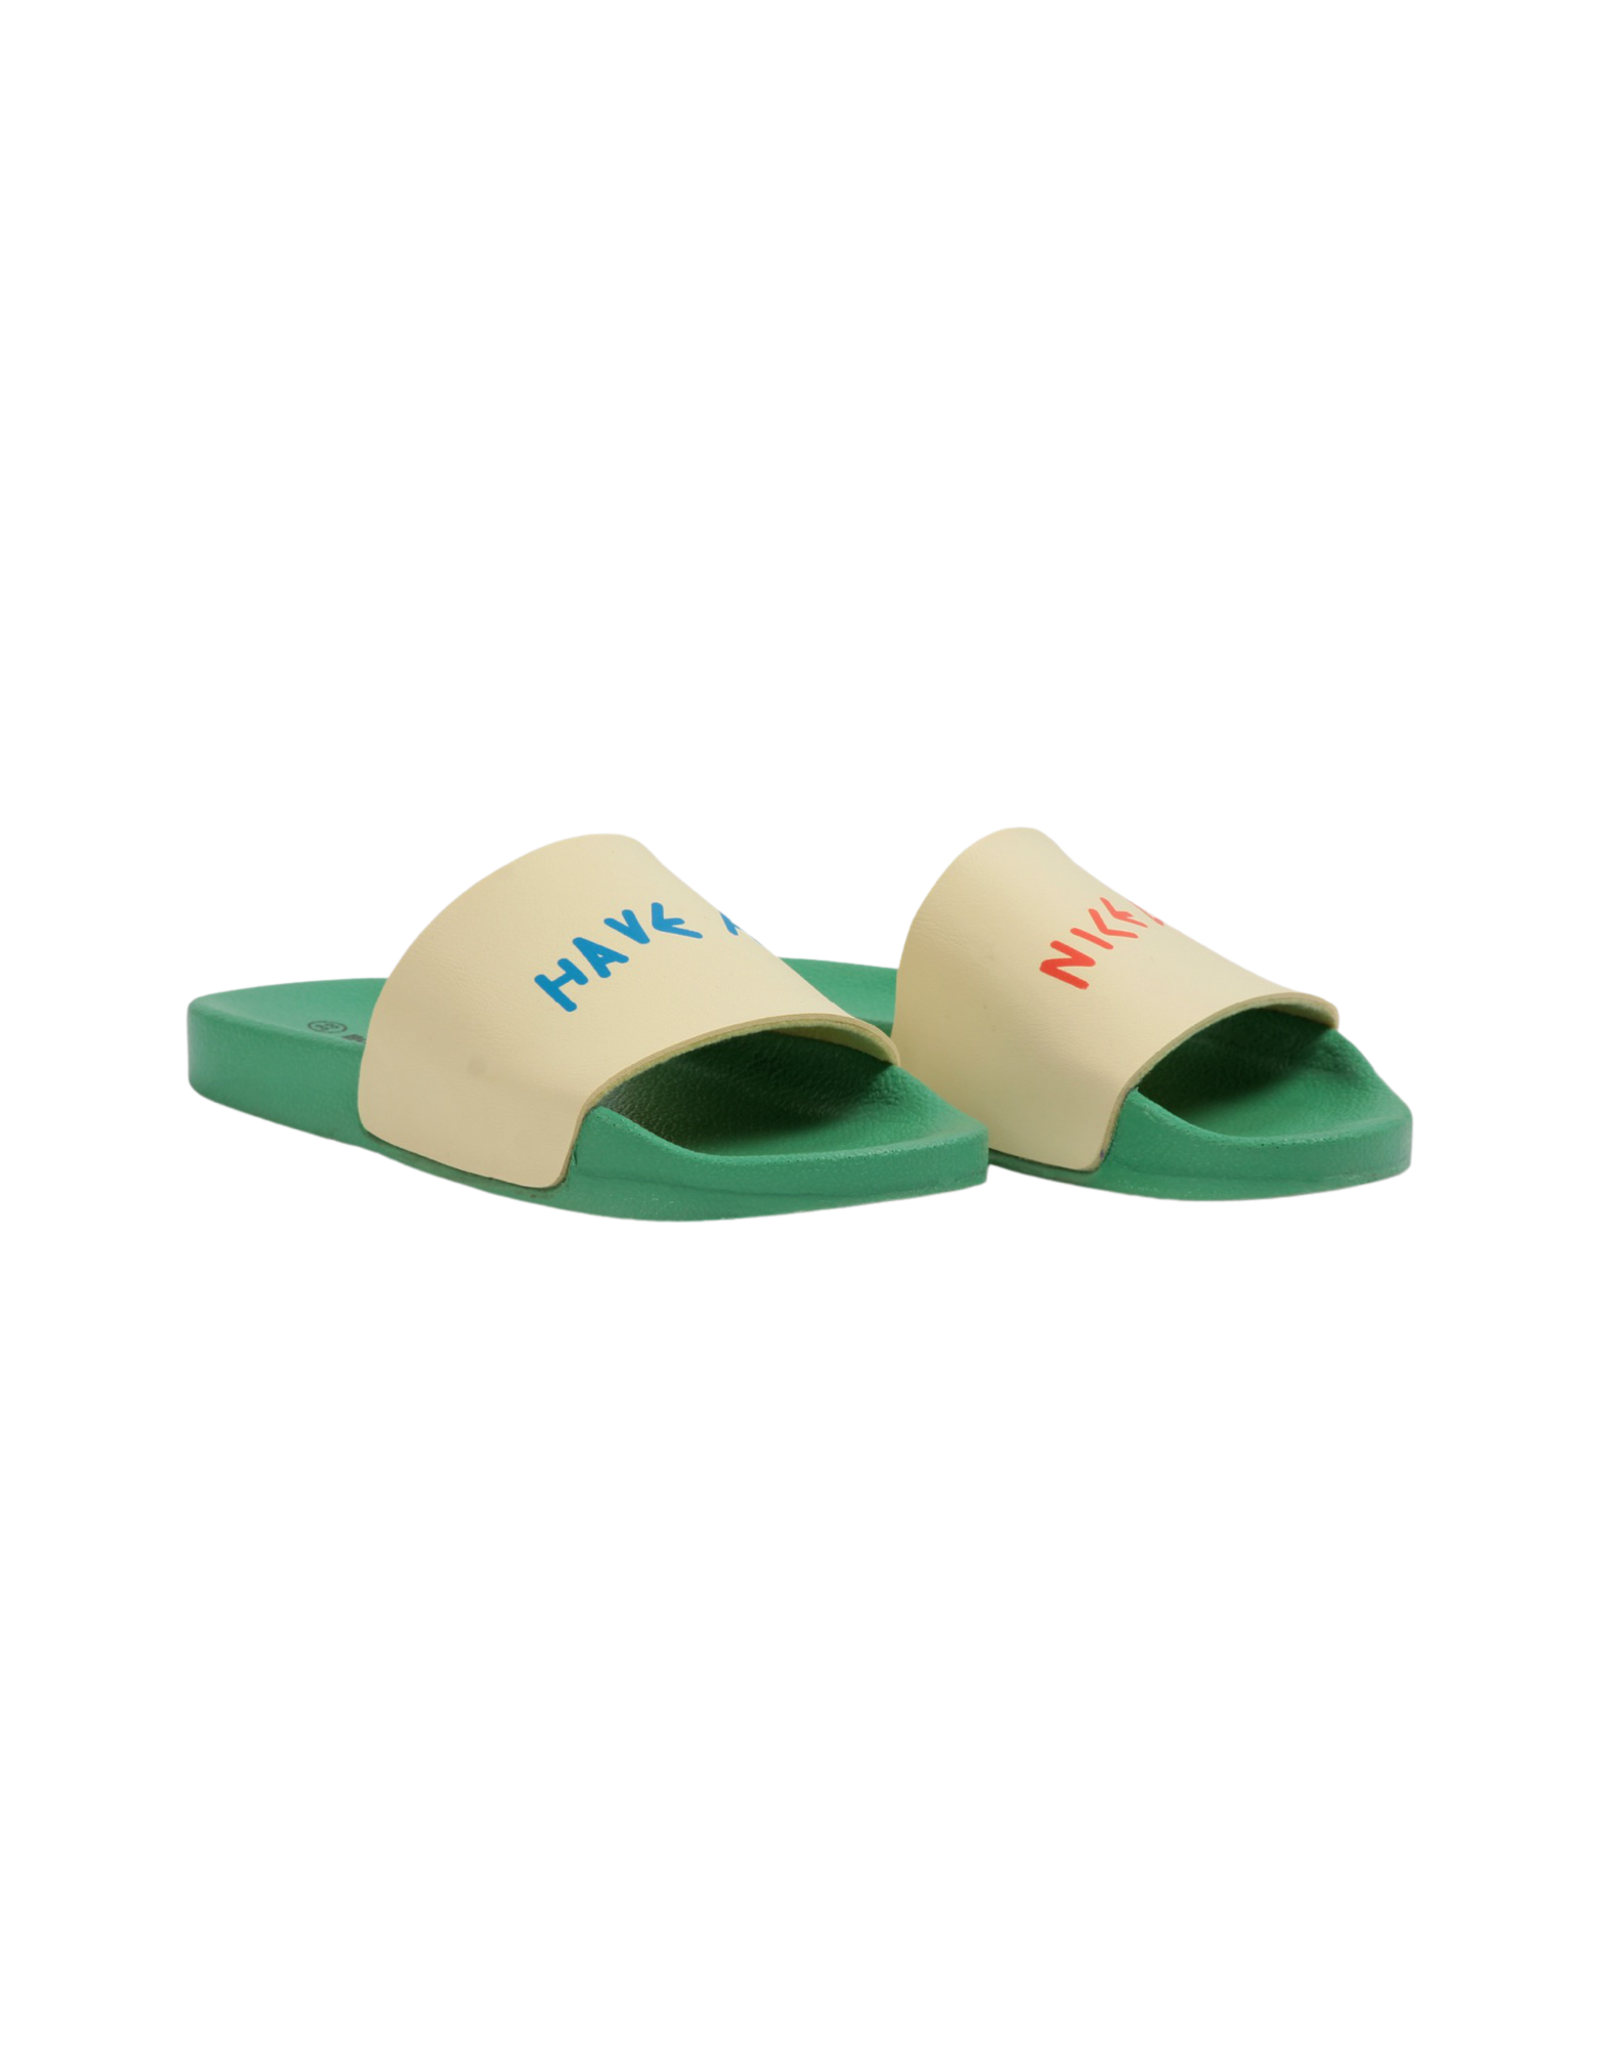 Bobo Choses Have A Nice Day flip flops